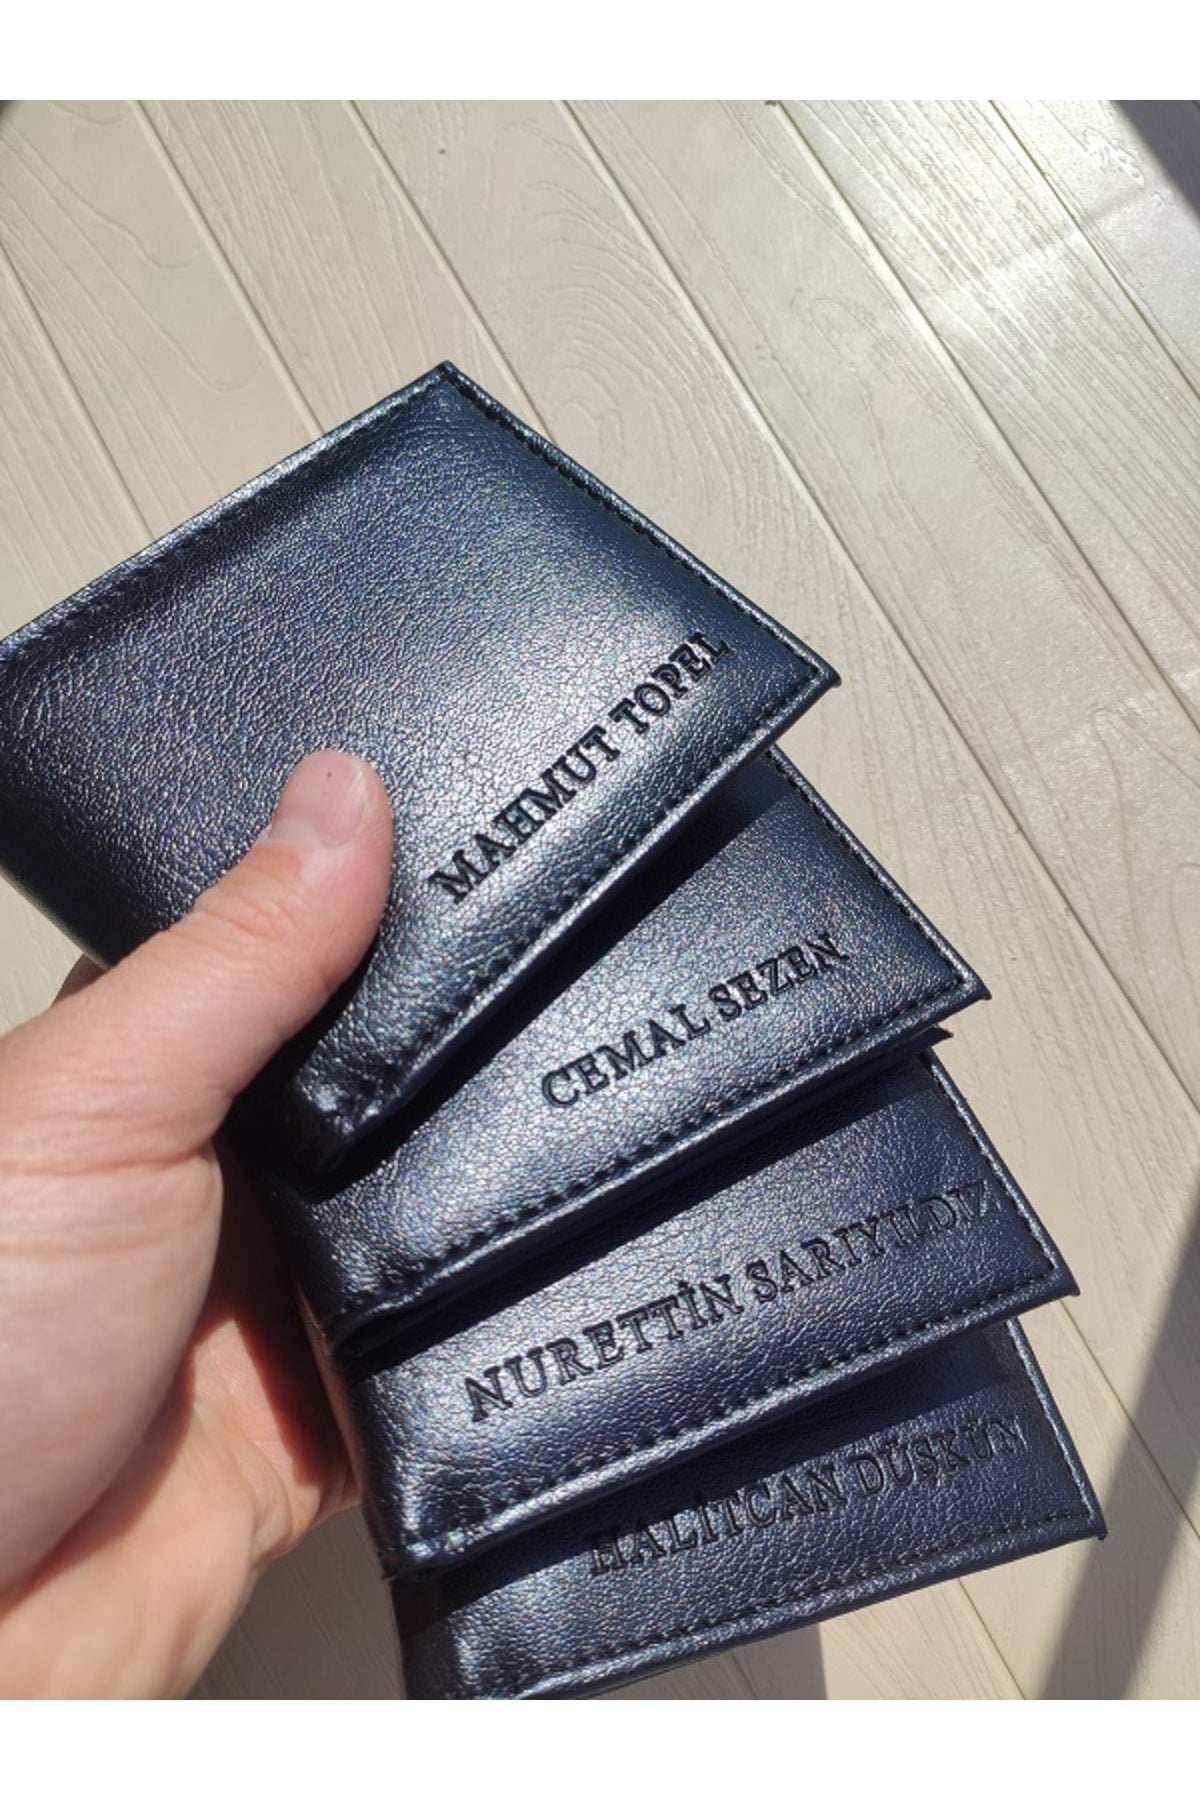 Black Men's Wallet Personalized with Name Printed